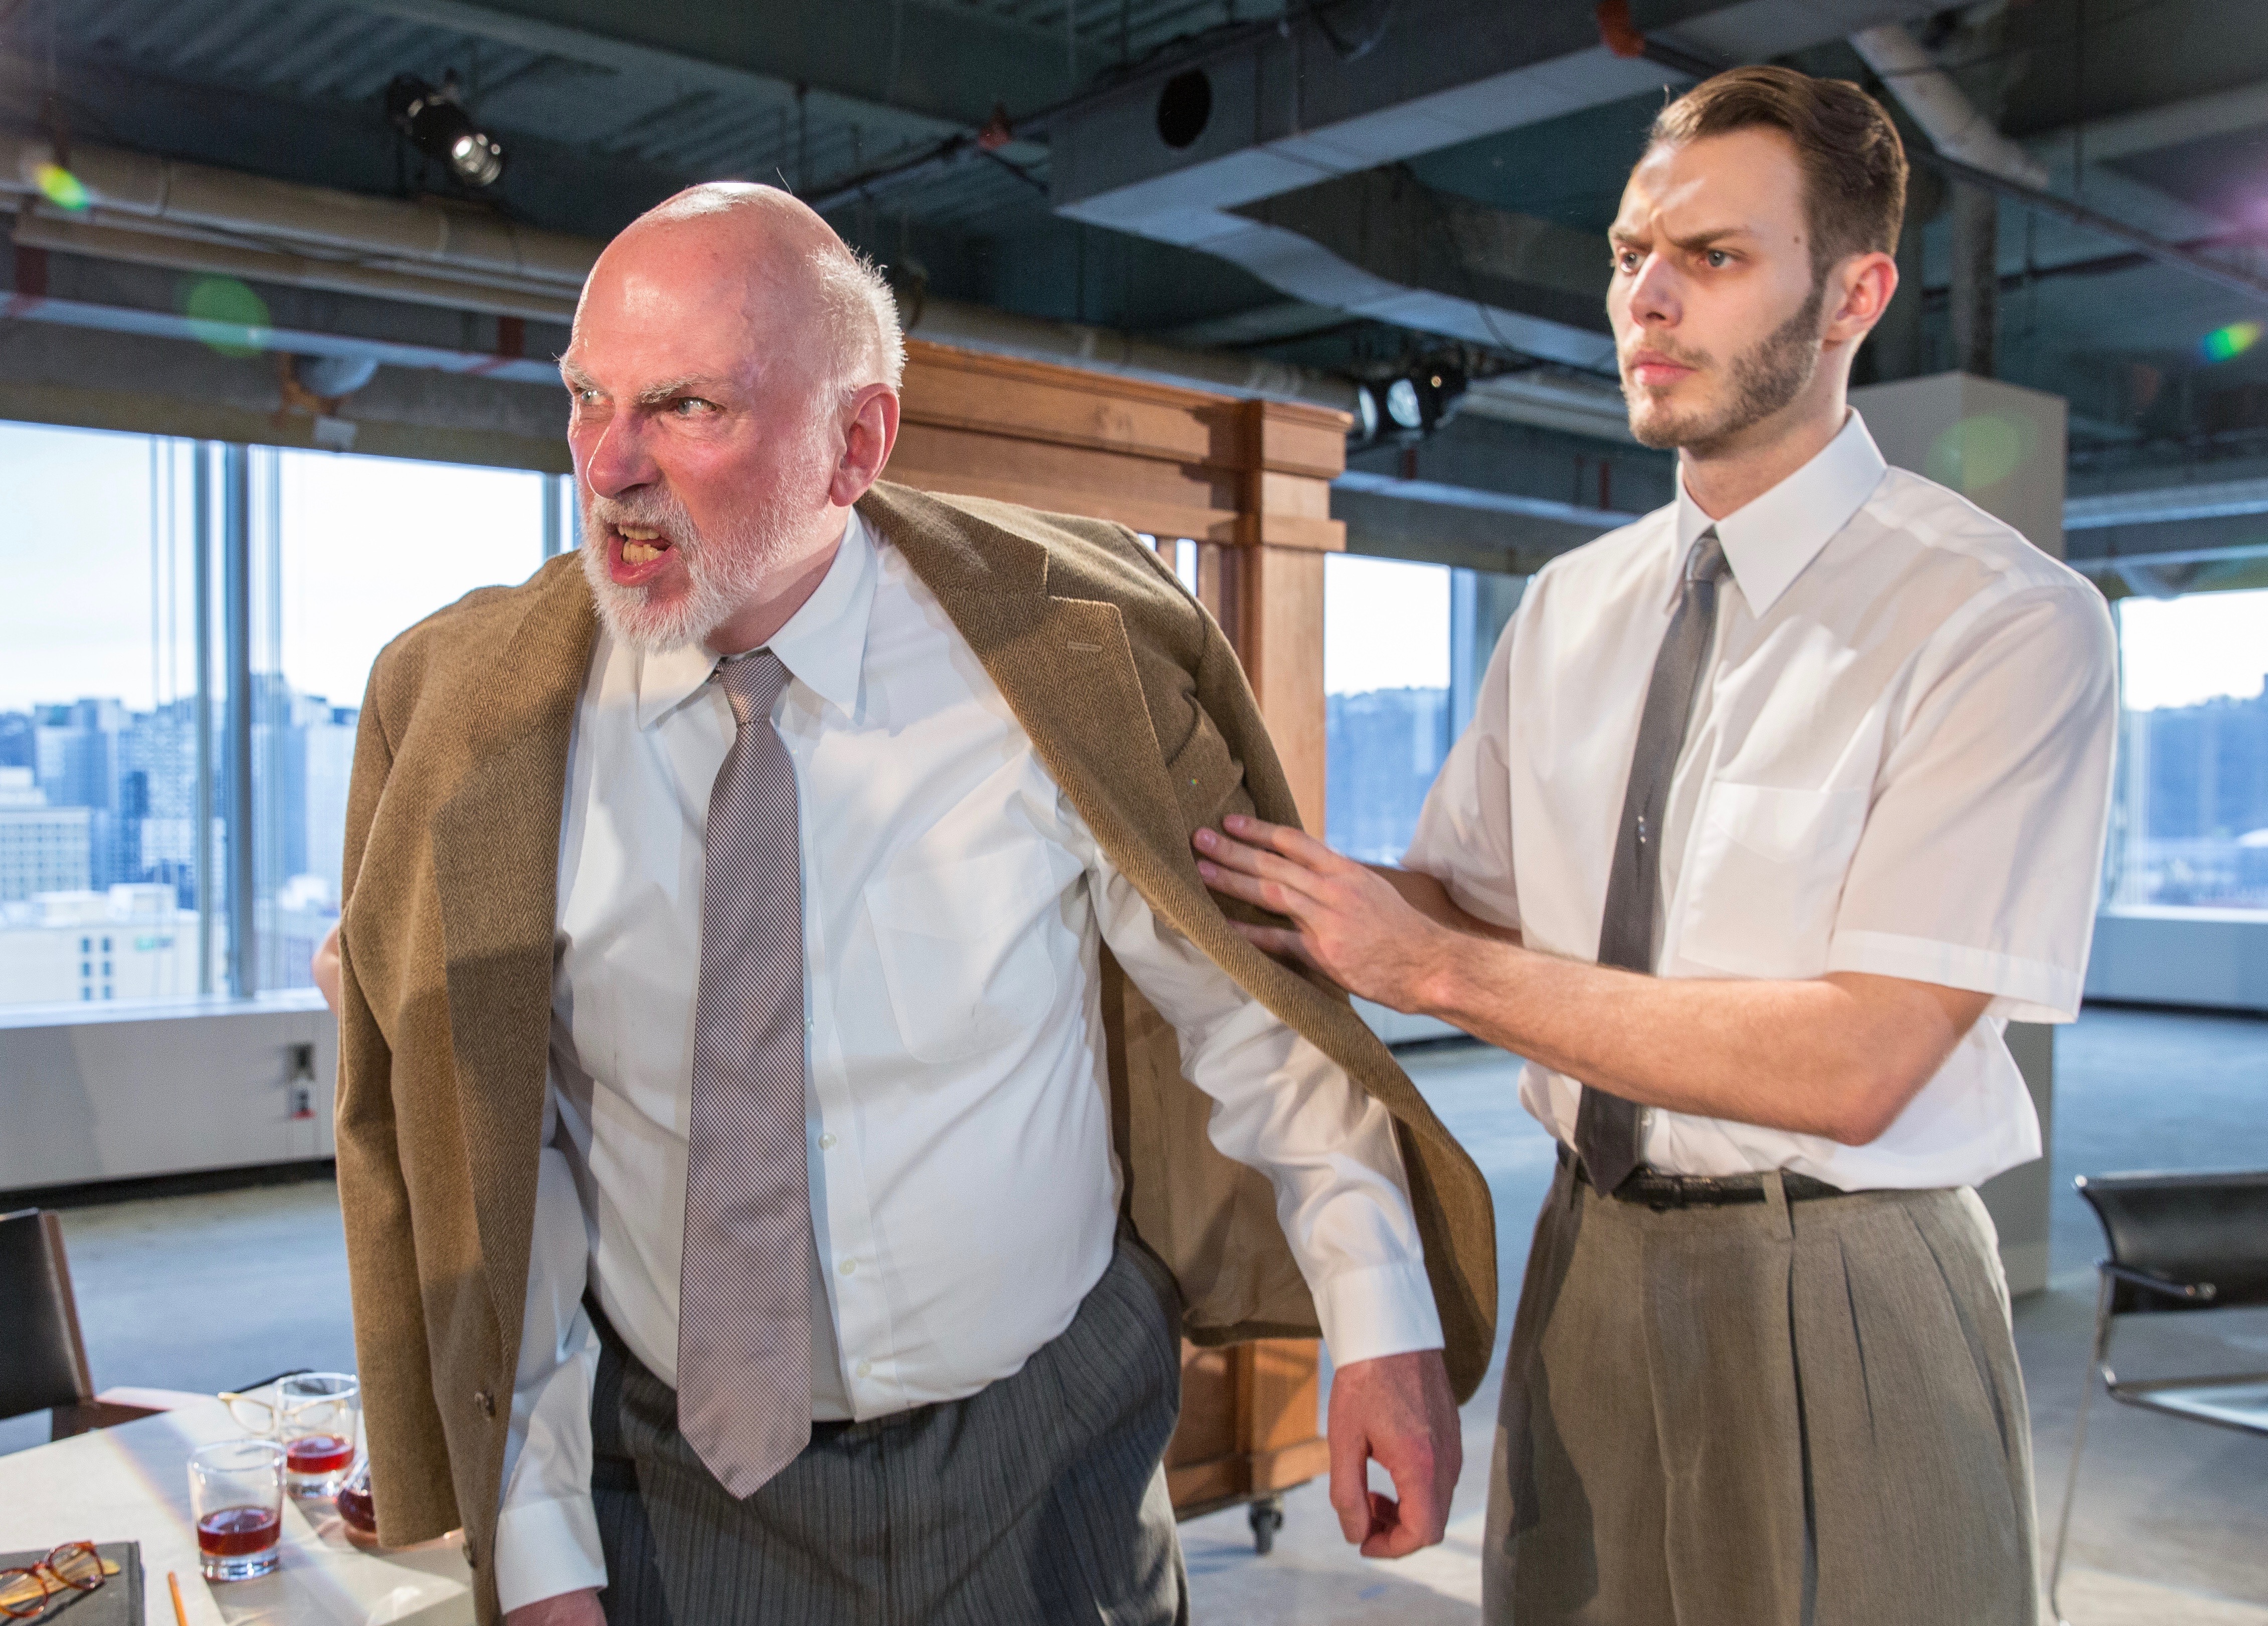 Old passions erupt in new form in Ibsen's "The Master Builder" at Quantum Theatre. Here, inflamed papa Knut Brovik (John Reilly, L) gets the chill-it handle from son Ragnar (Thomas Constantine Moore).